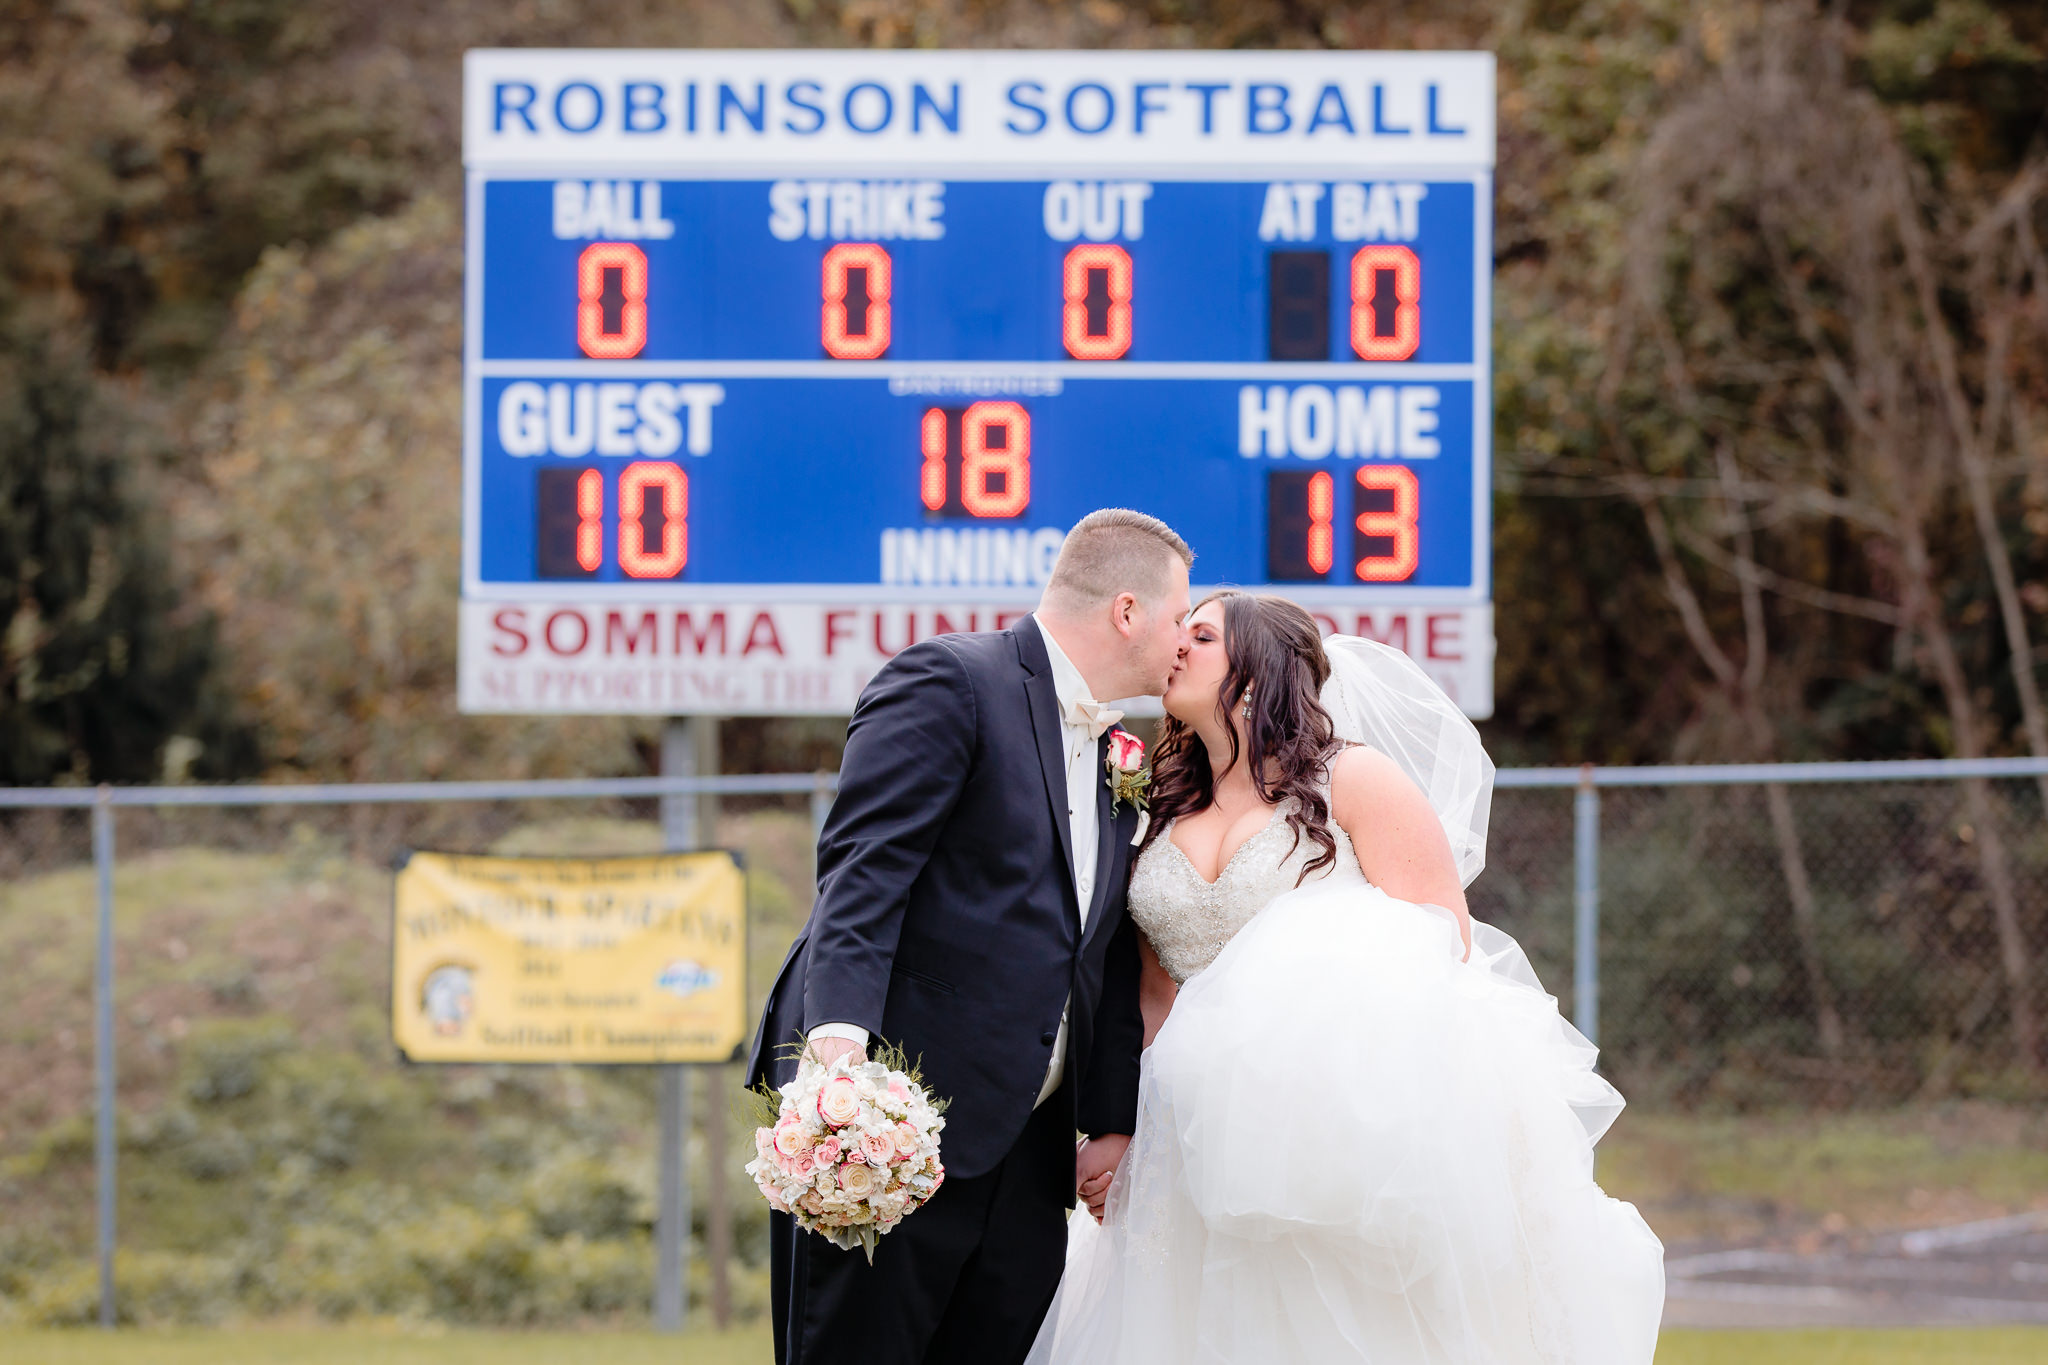 Bride & groom kiss in front of the scoreboard at the Robinson Township Girls Softball field